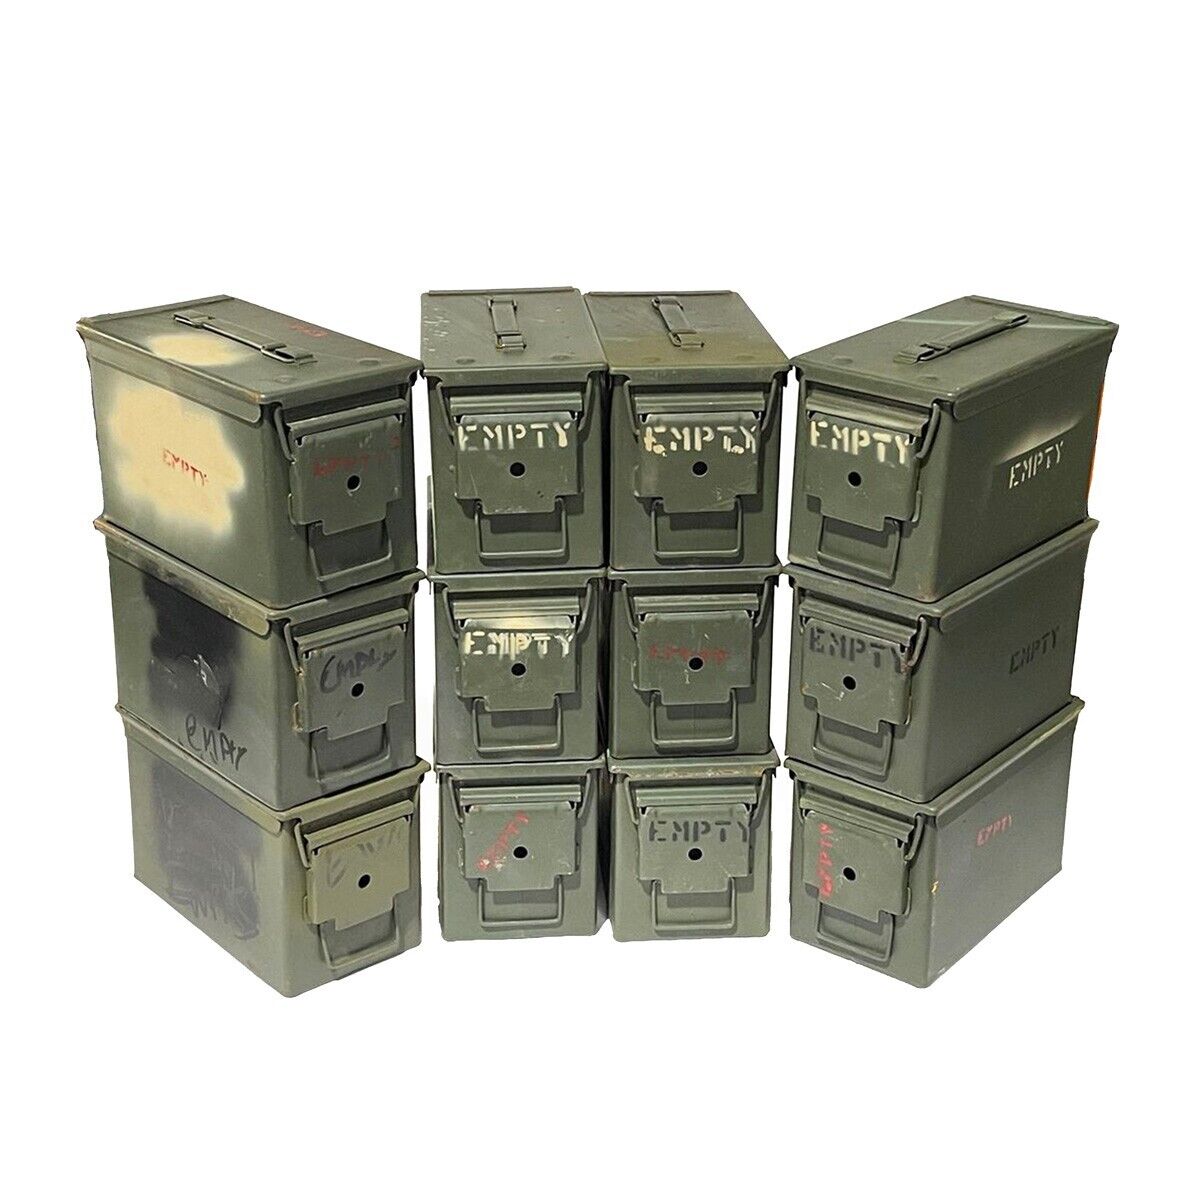 12 CANS  Grade 2  50 cal empty ammo cans 12 Total  